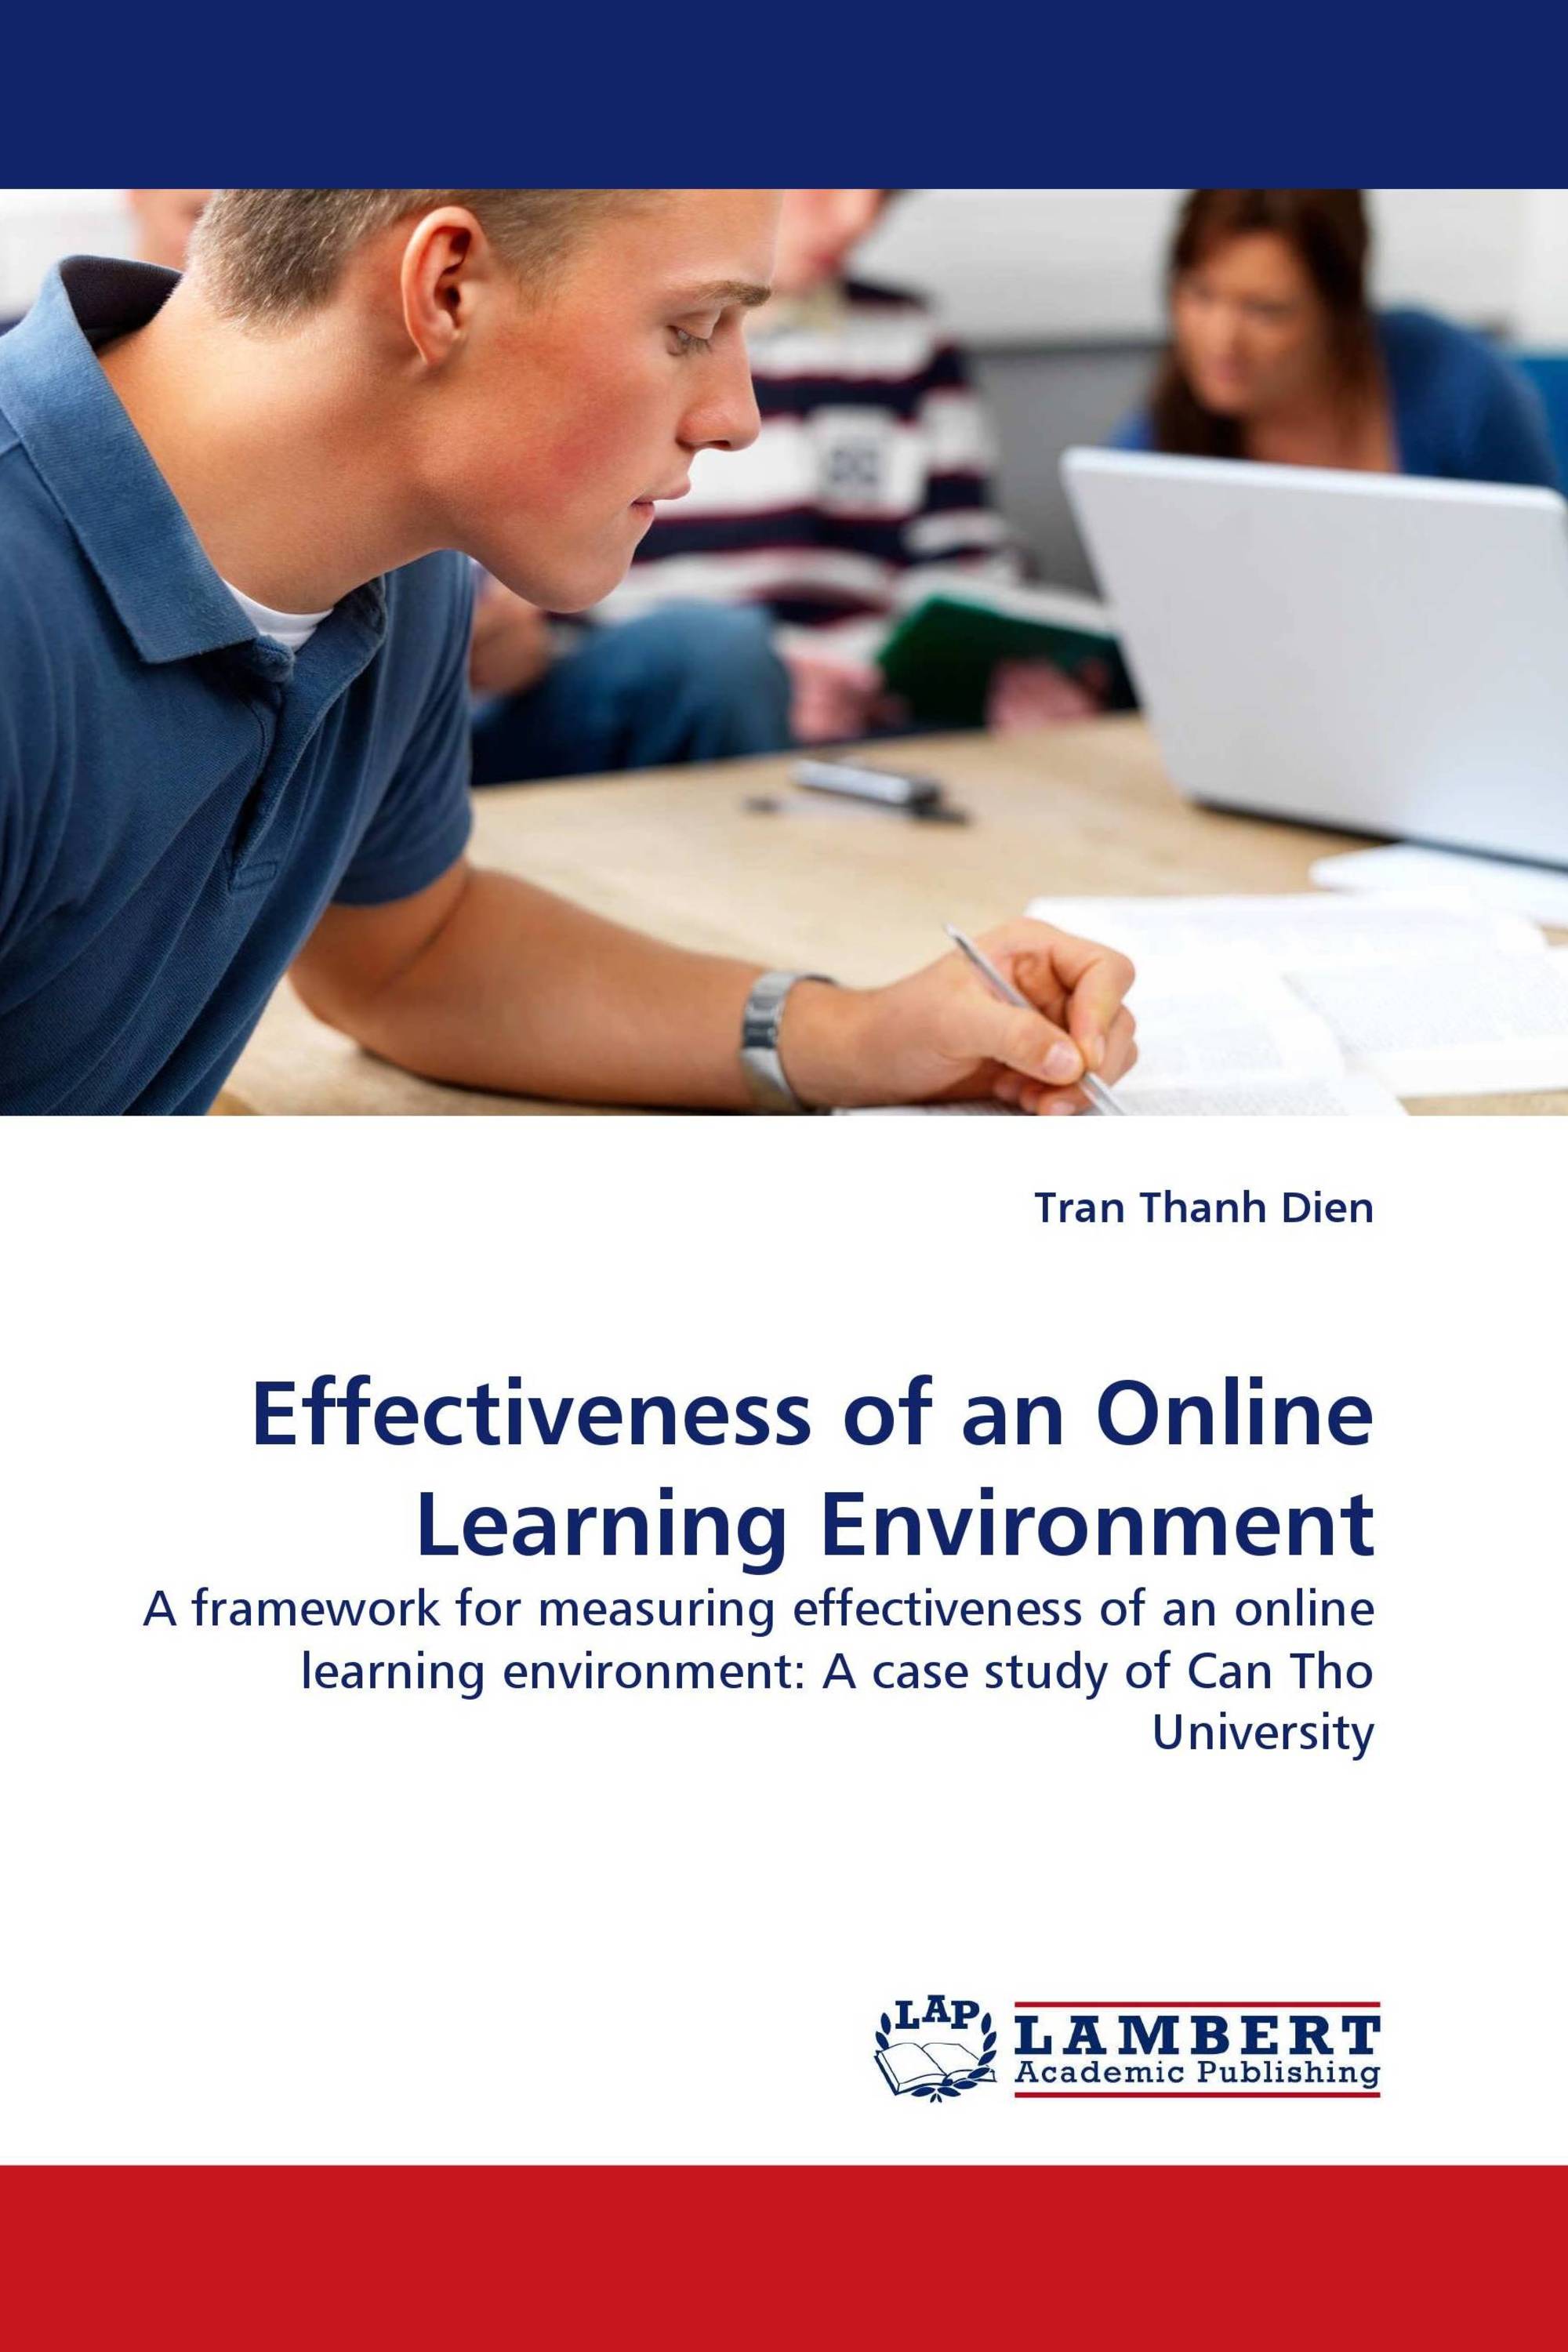 Effectiveness of an Online Learning Environment